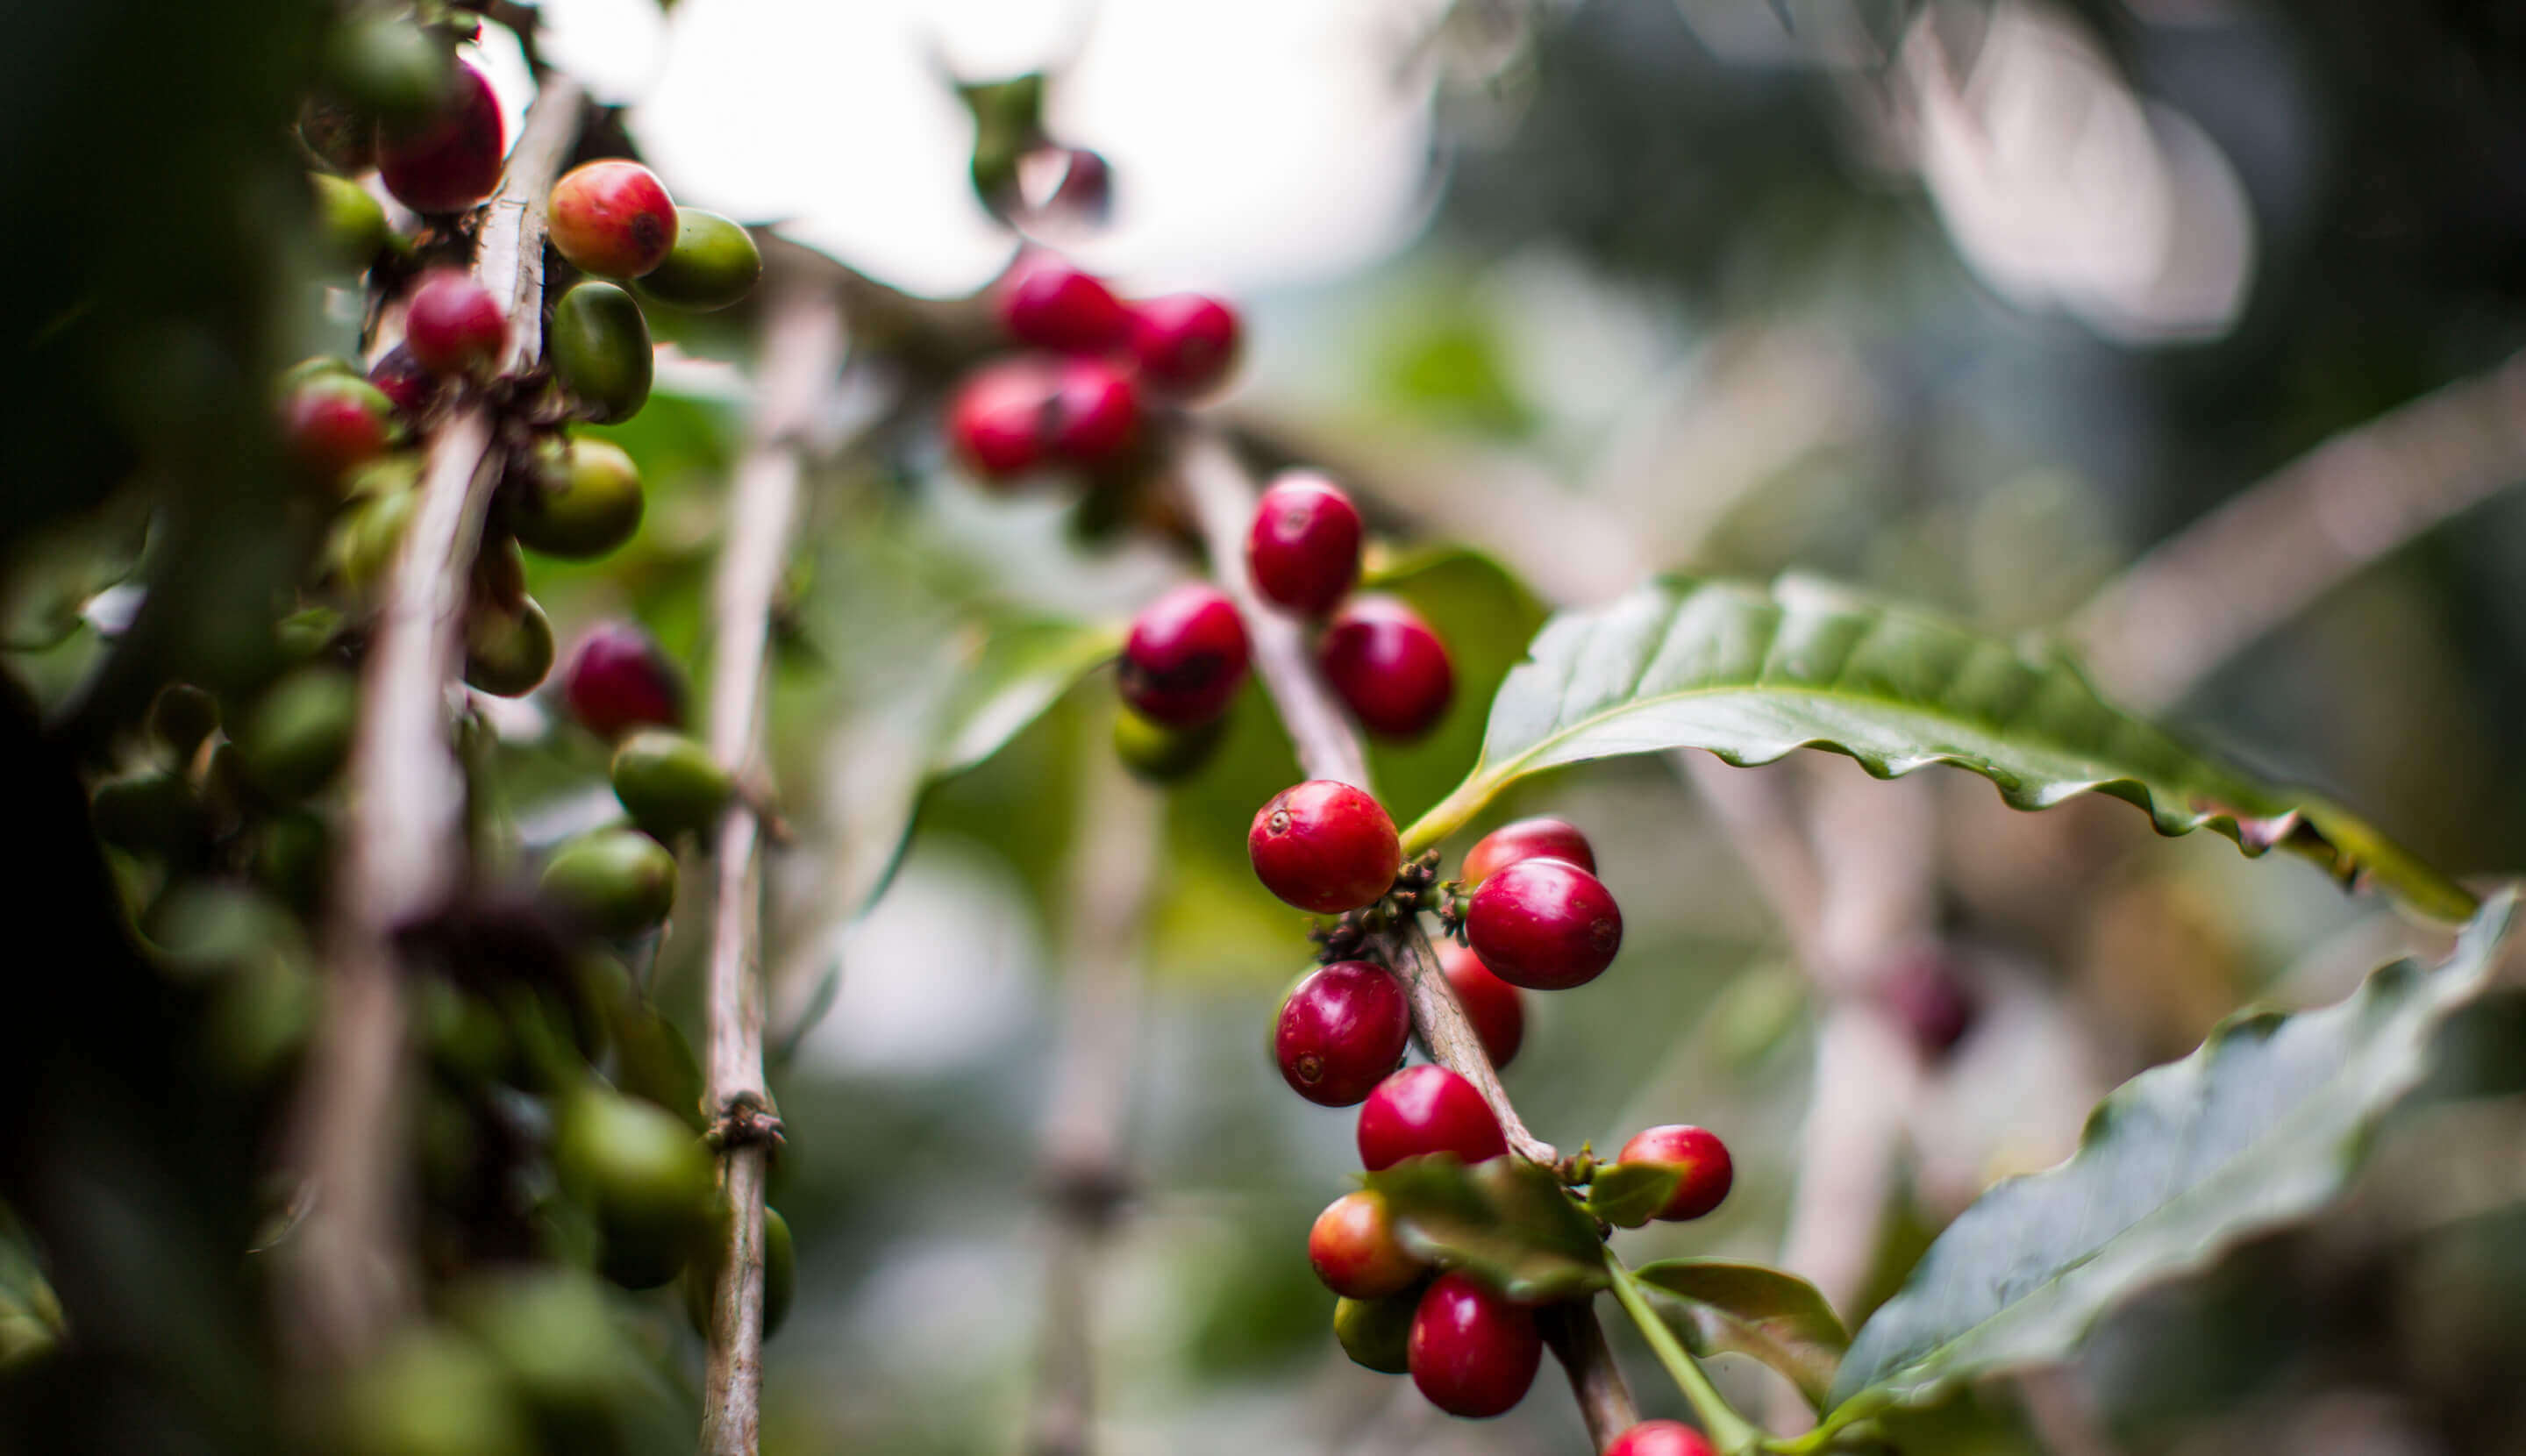 Some extra intriguing facts about Arabica